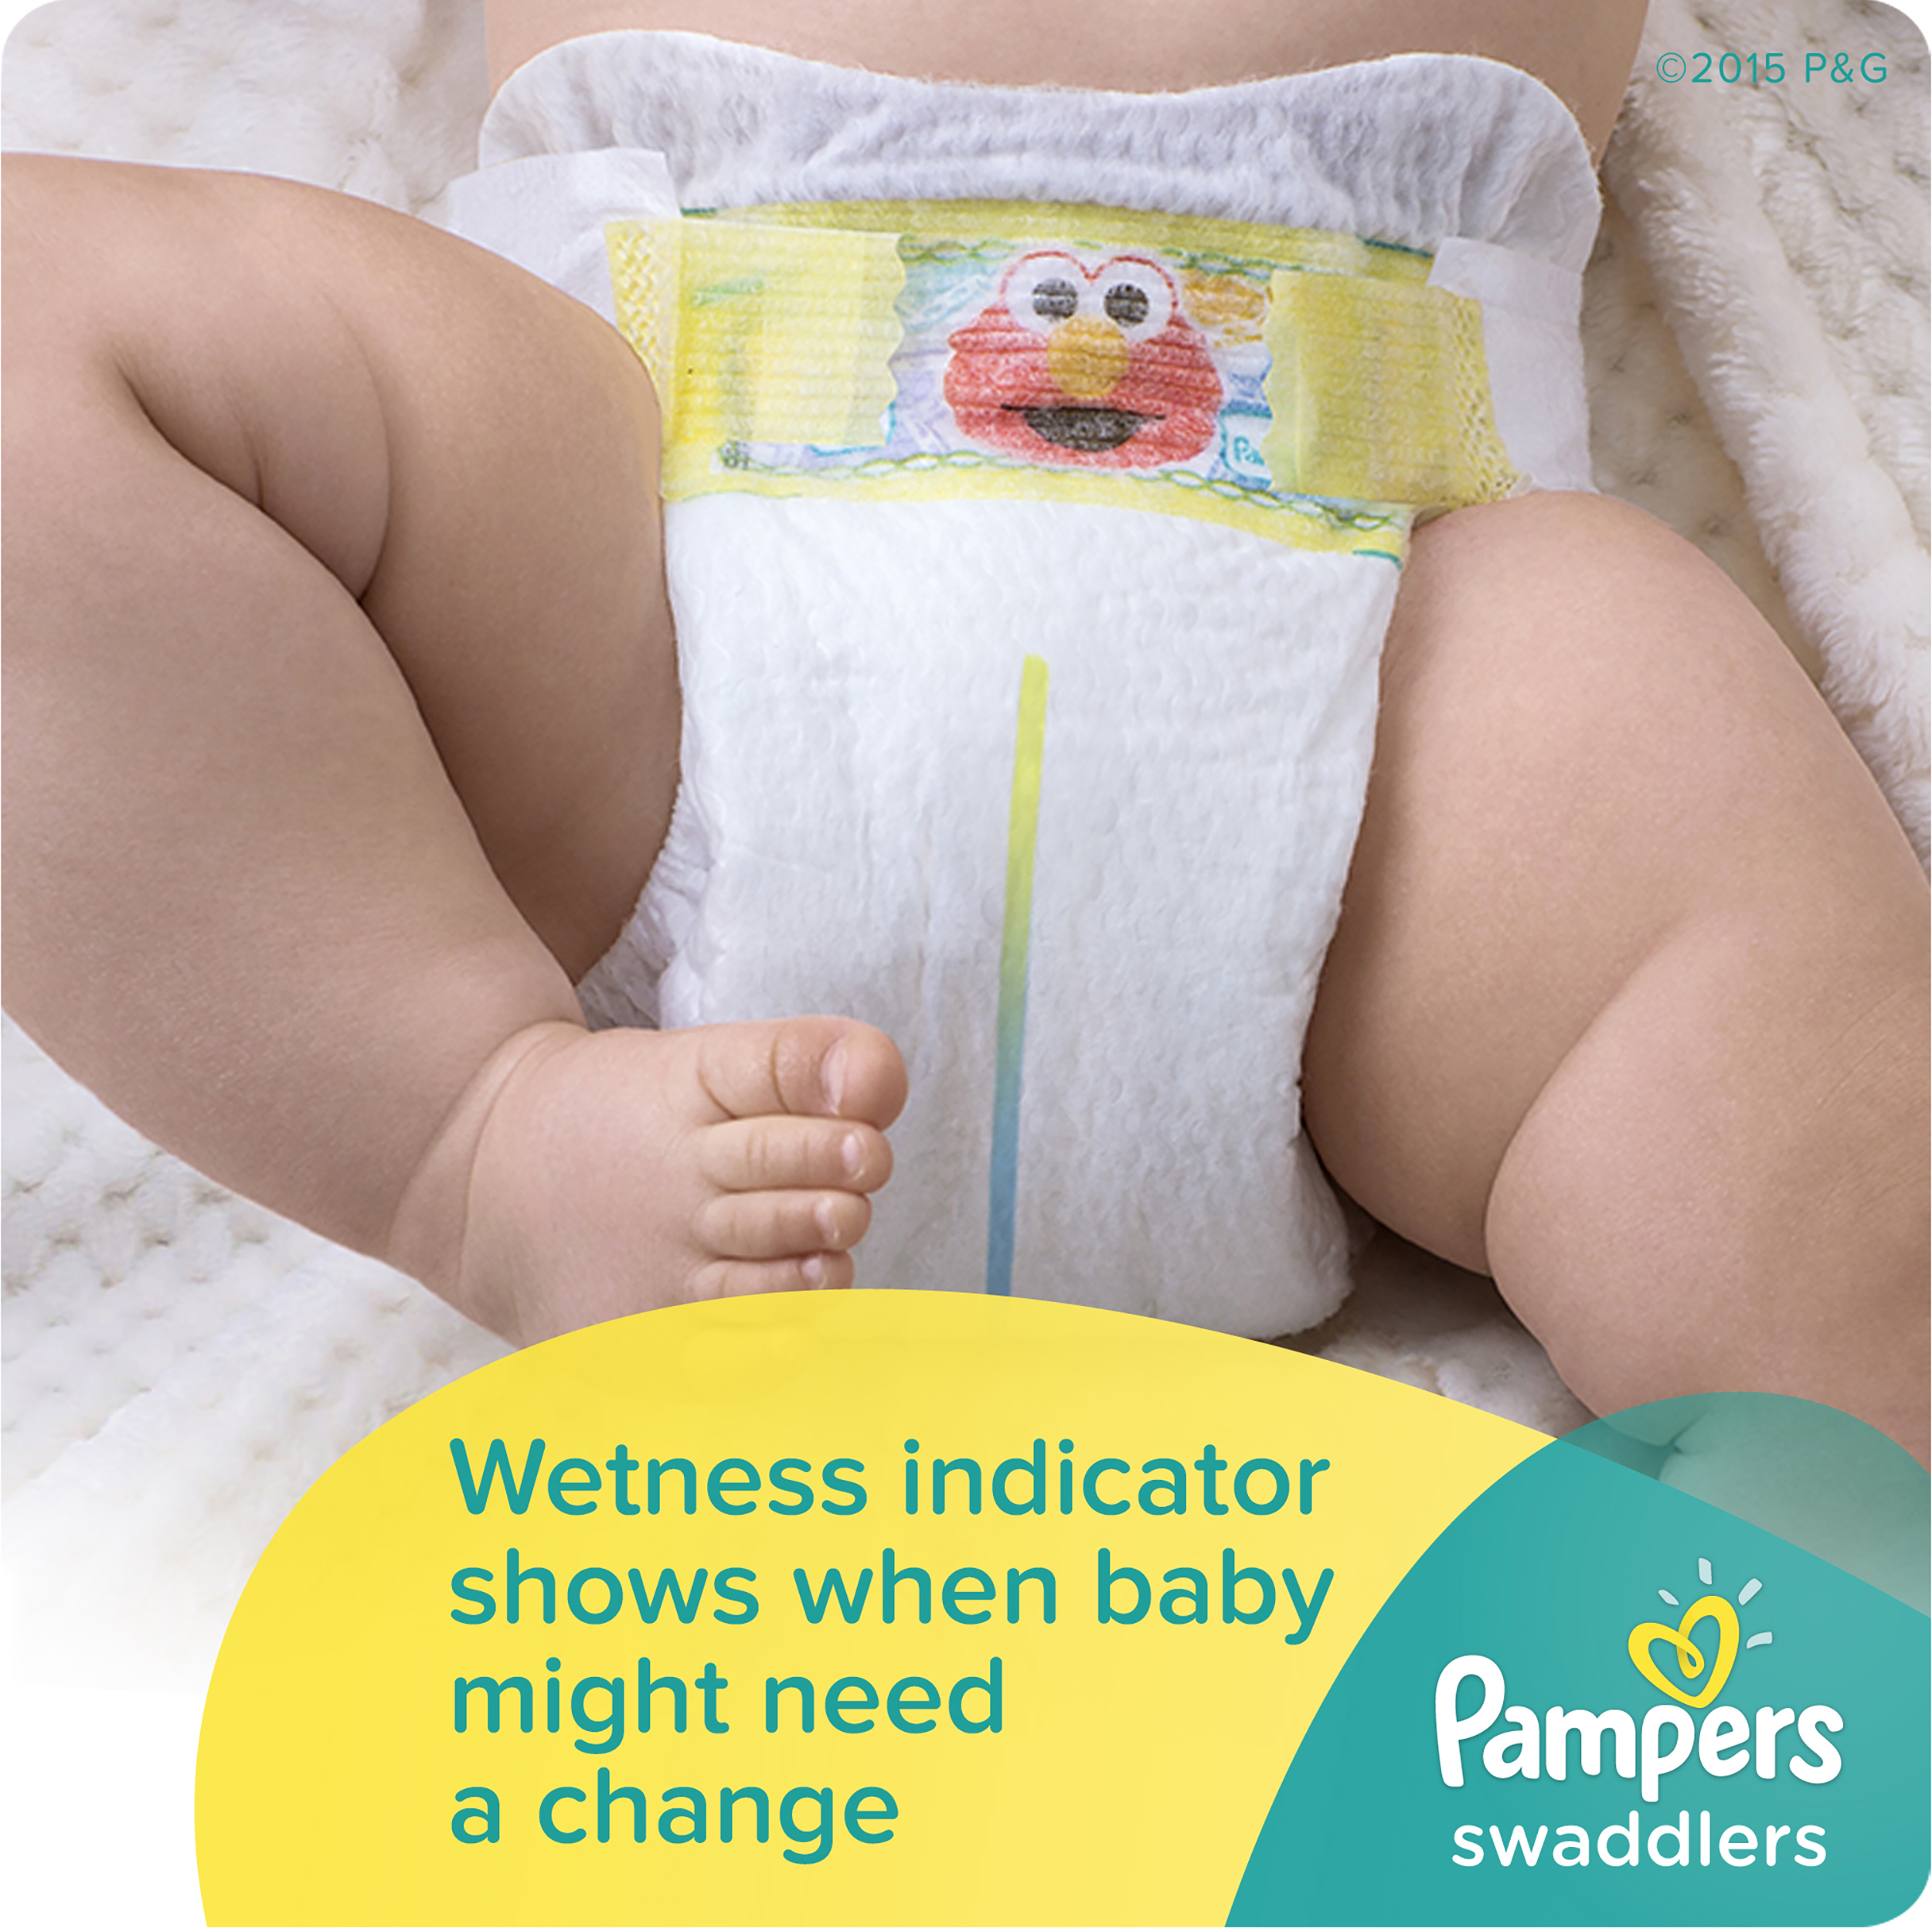 Pampers Swaddlers Newborn Diapers Size 0 128 count - image 5 of 10